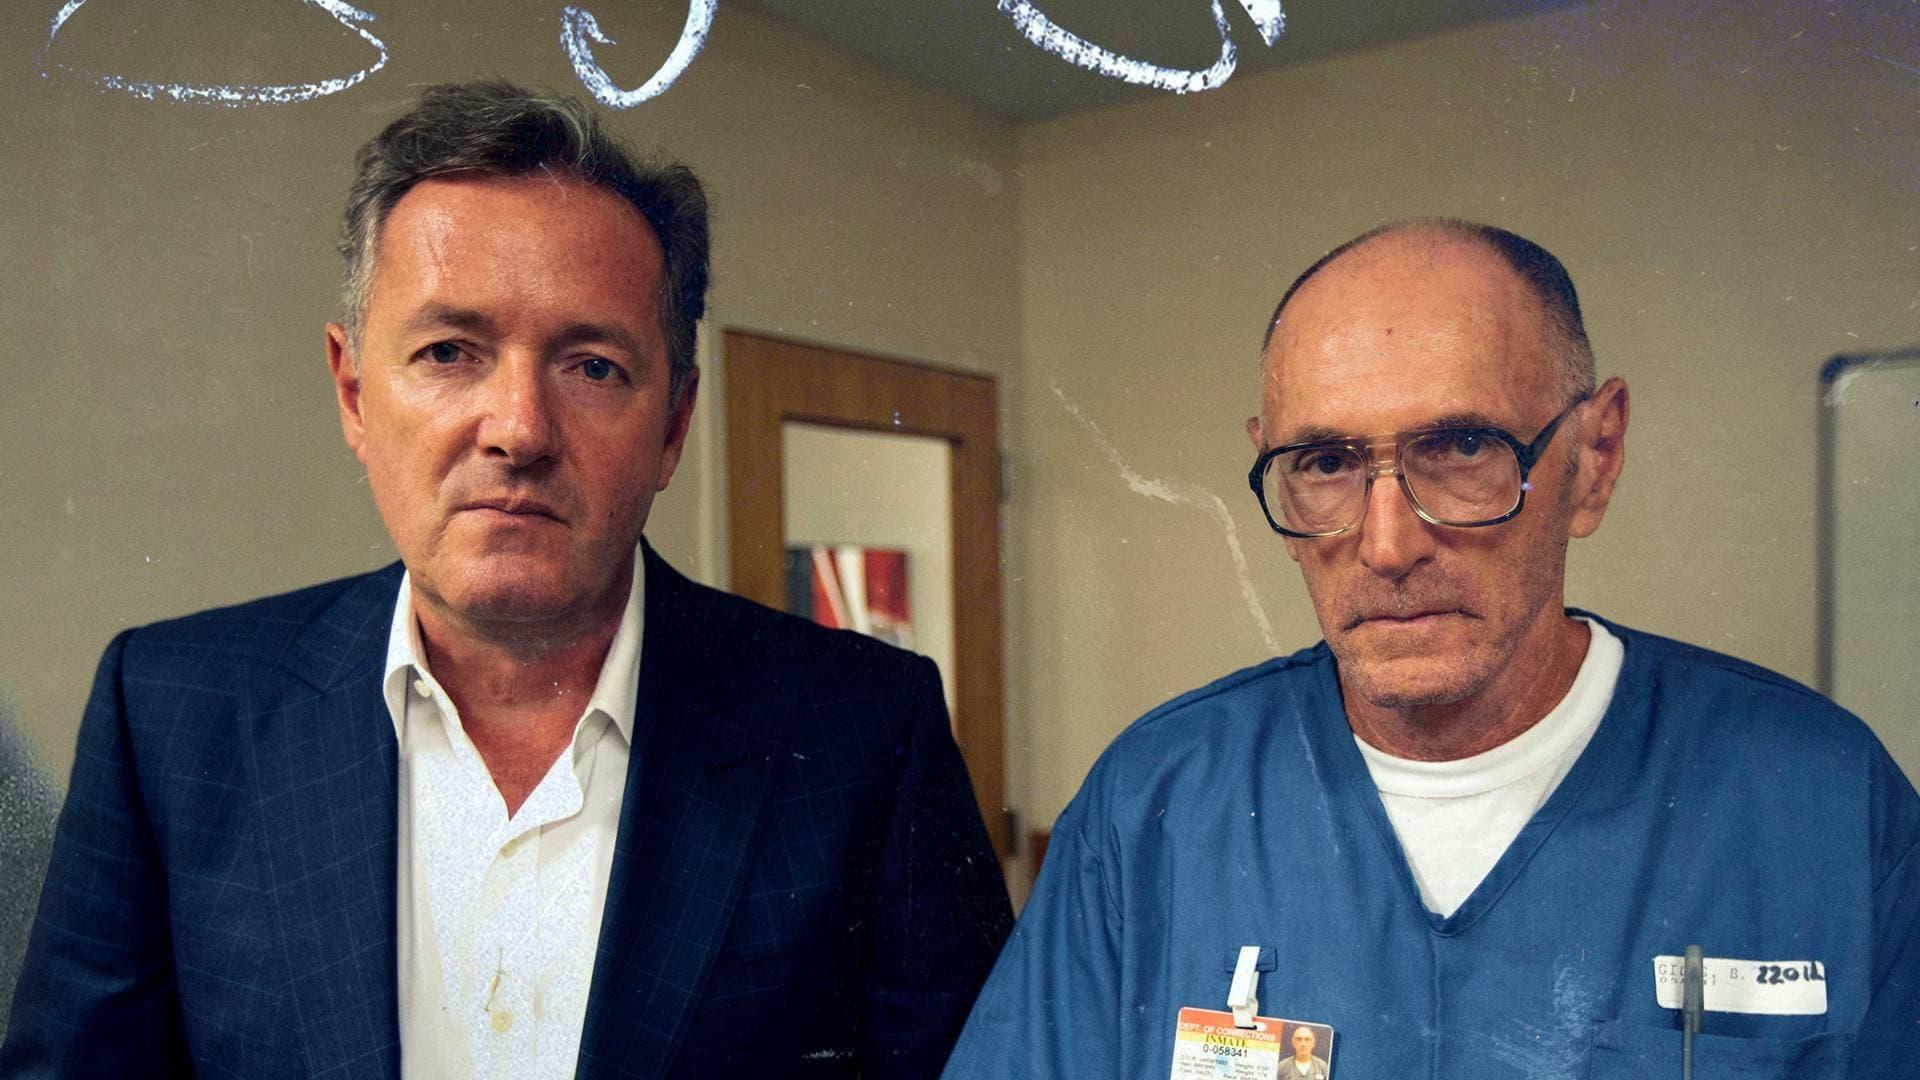 Confessions of a Serial Killer with Piers Morgan backdrop